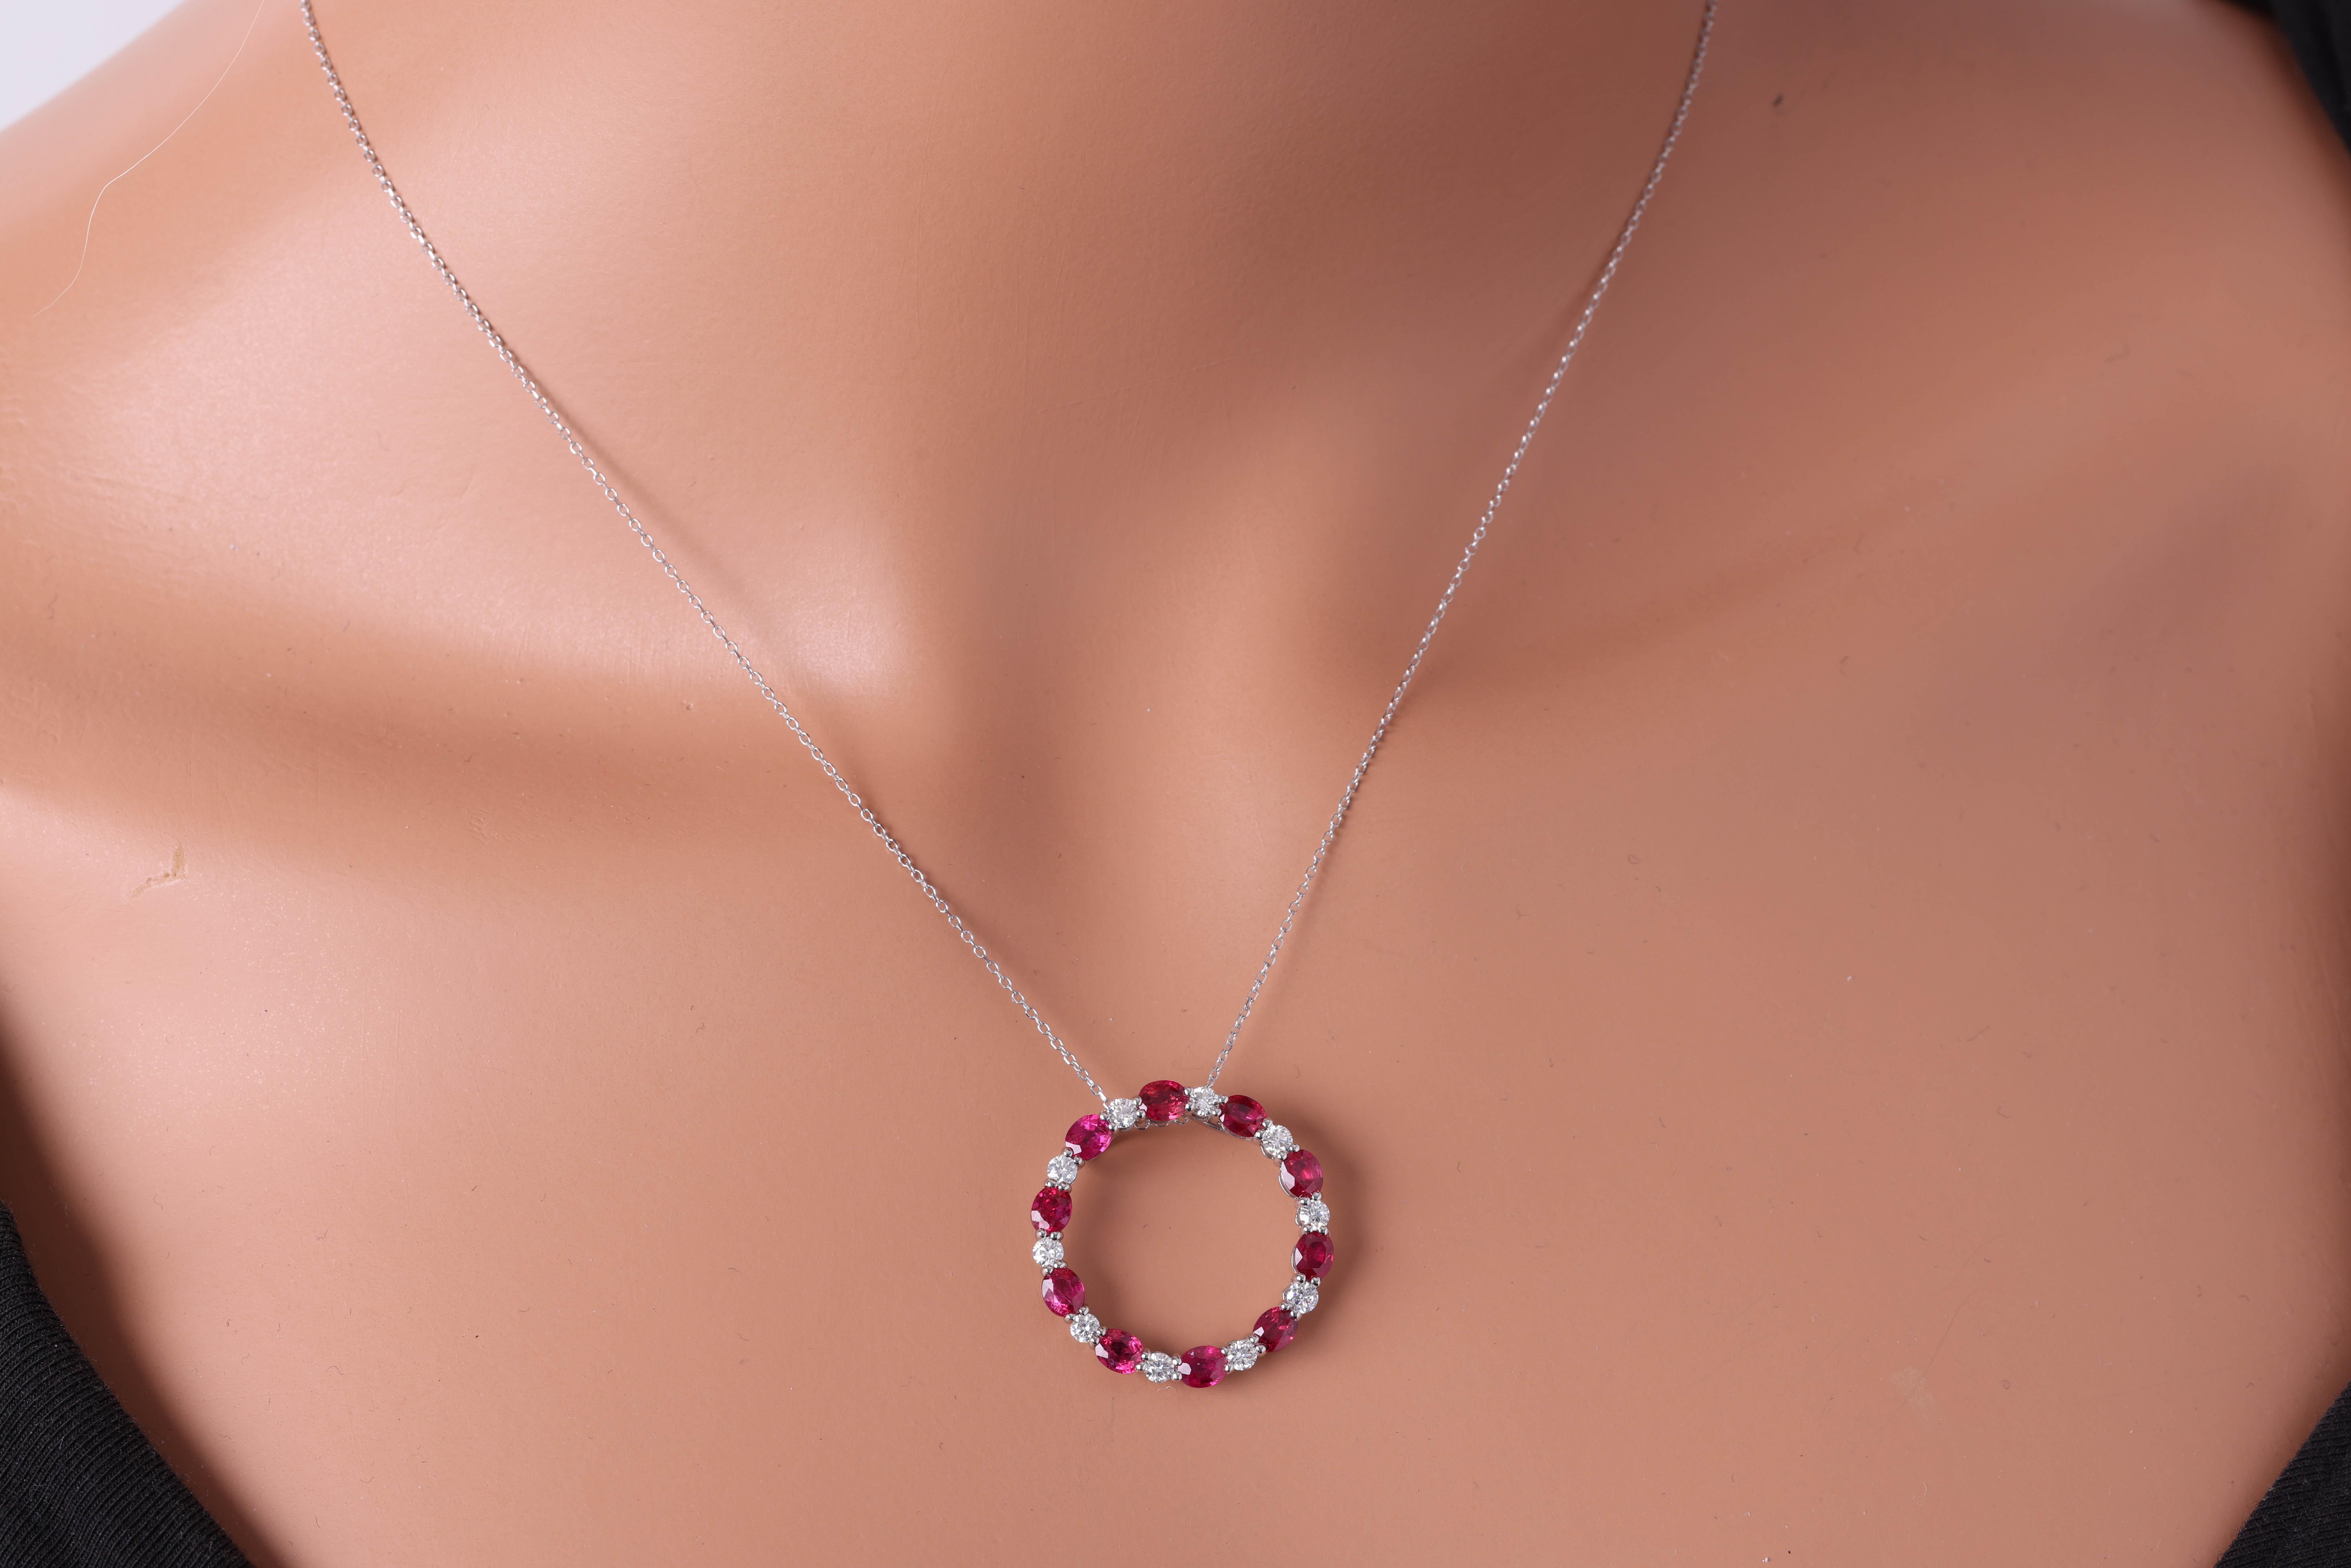 Adorn yourself with elegance and sophistication with our exquisite pendant! Crafted to captivate, this stunning piece boasts a harmonious blend of luxury and allure. Imagine ten resplendent oval cut rubies, totaling an impressive 2.72 carats,